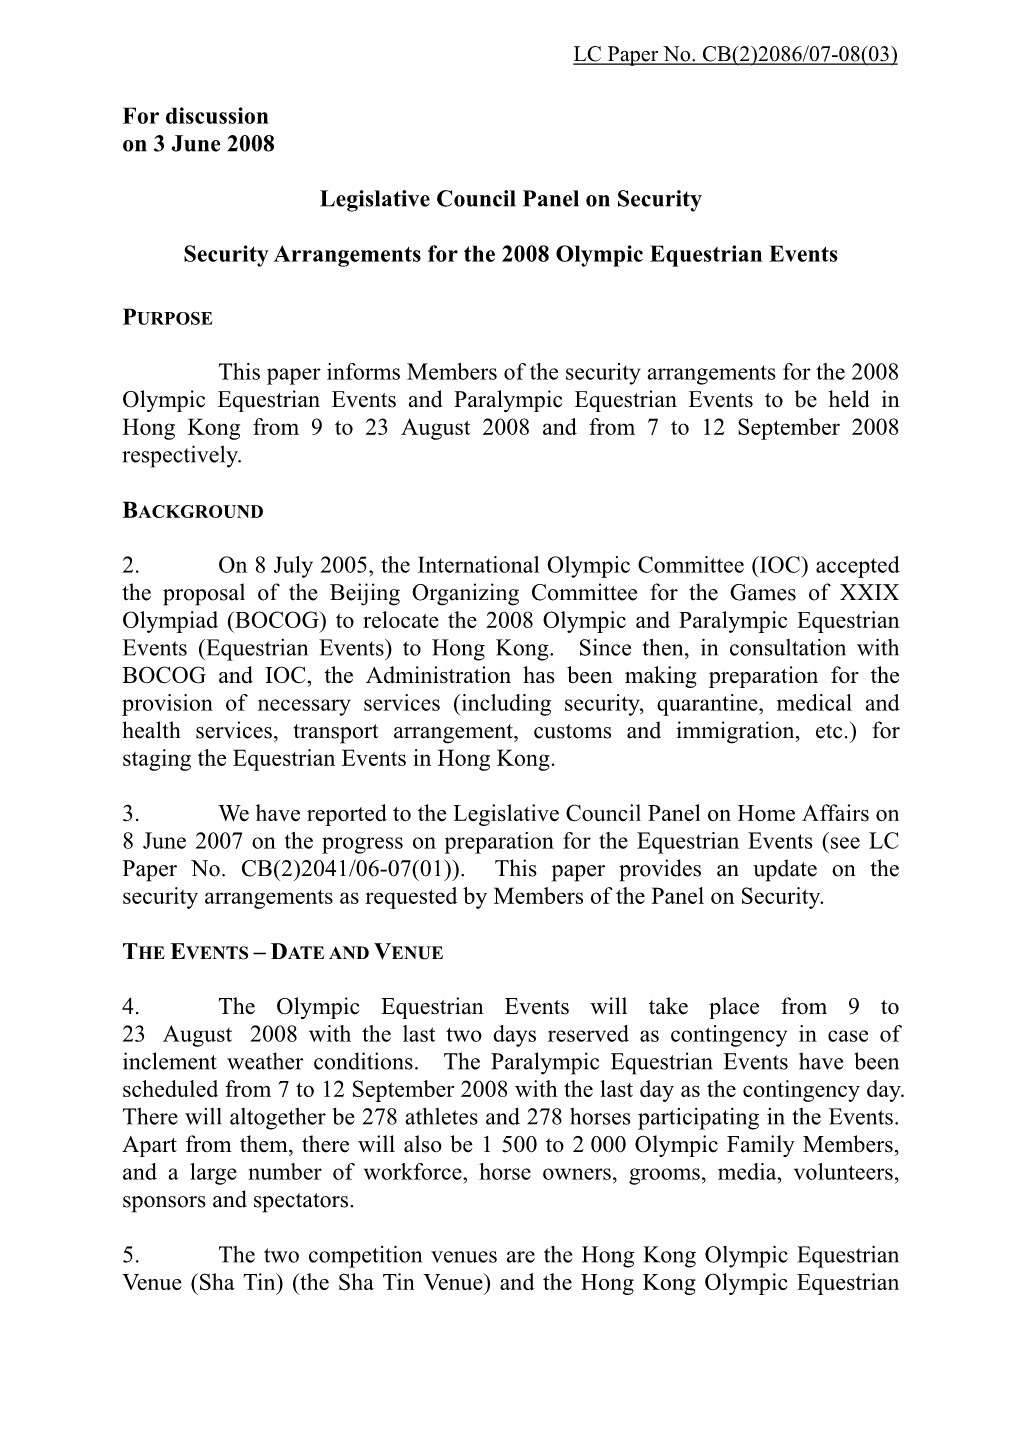 Administration's Paper on Security Arrangements for the 2008 Olympic